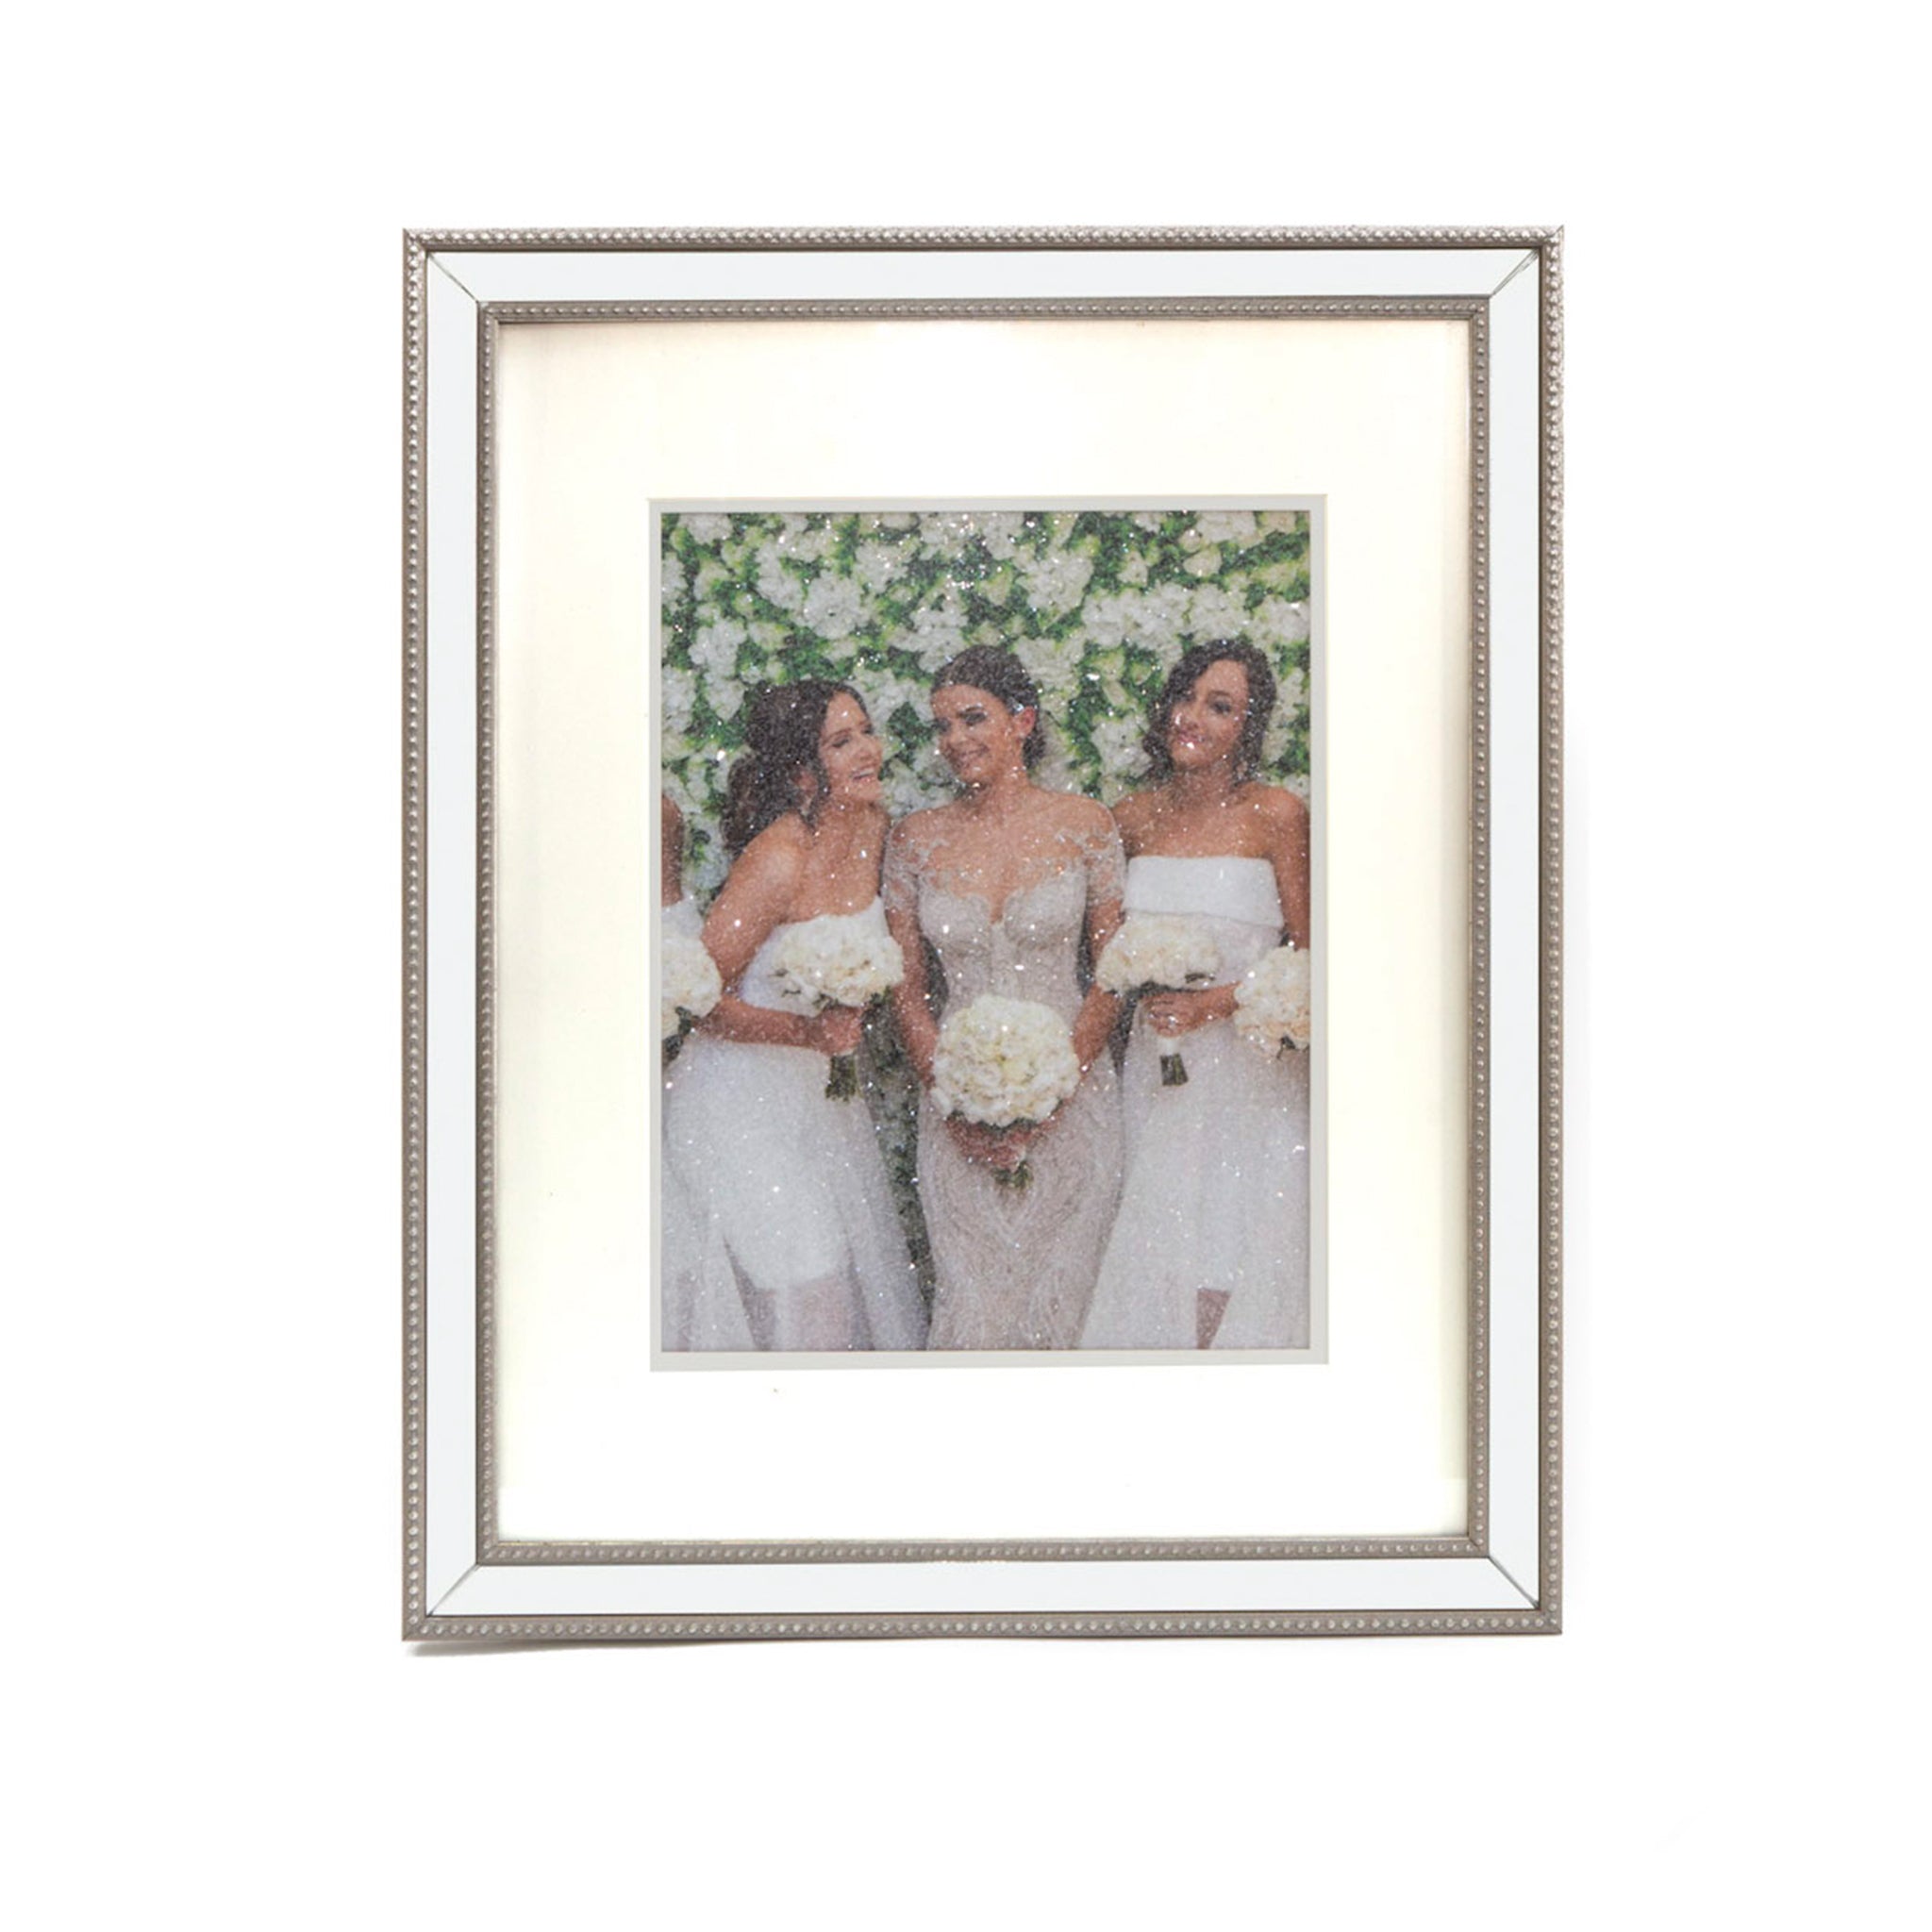 8x10 Diamond Dusted Photo -Matted Frame - LE EL New York